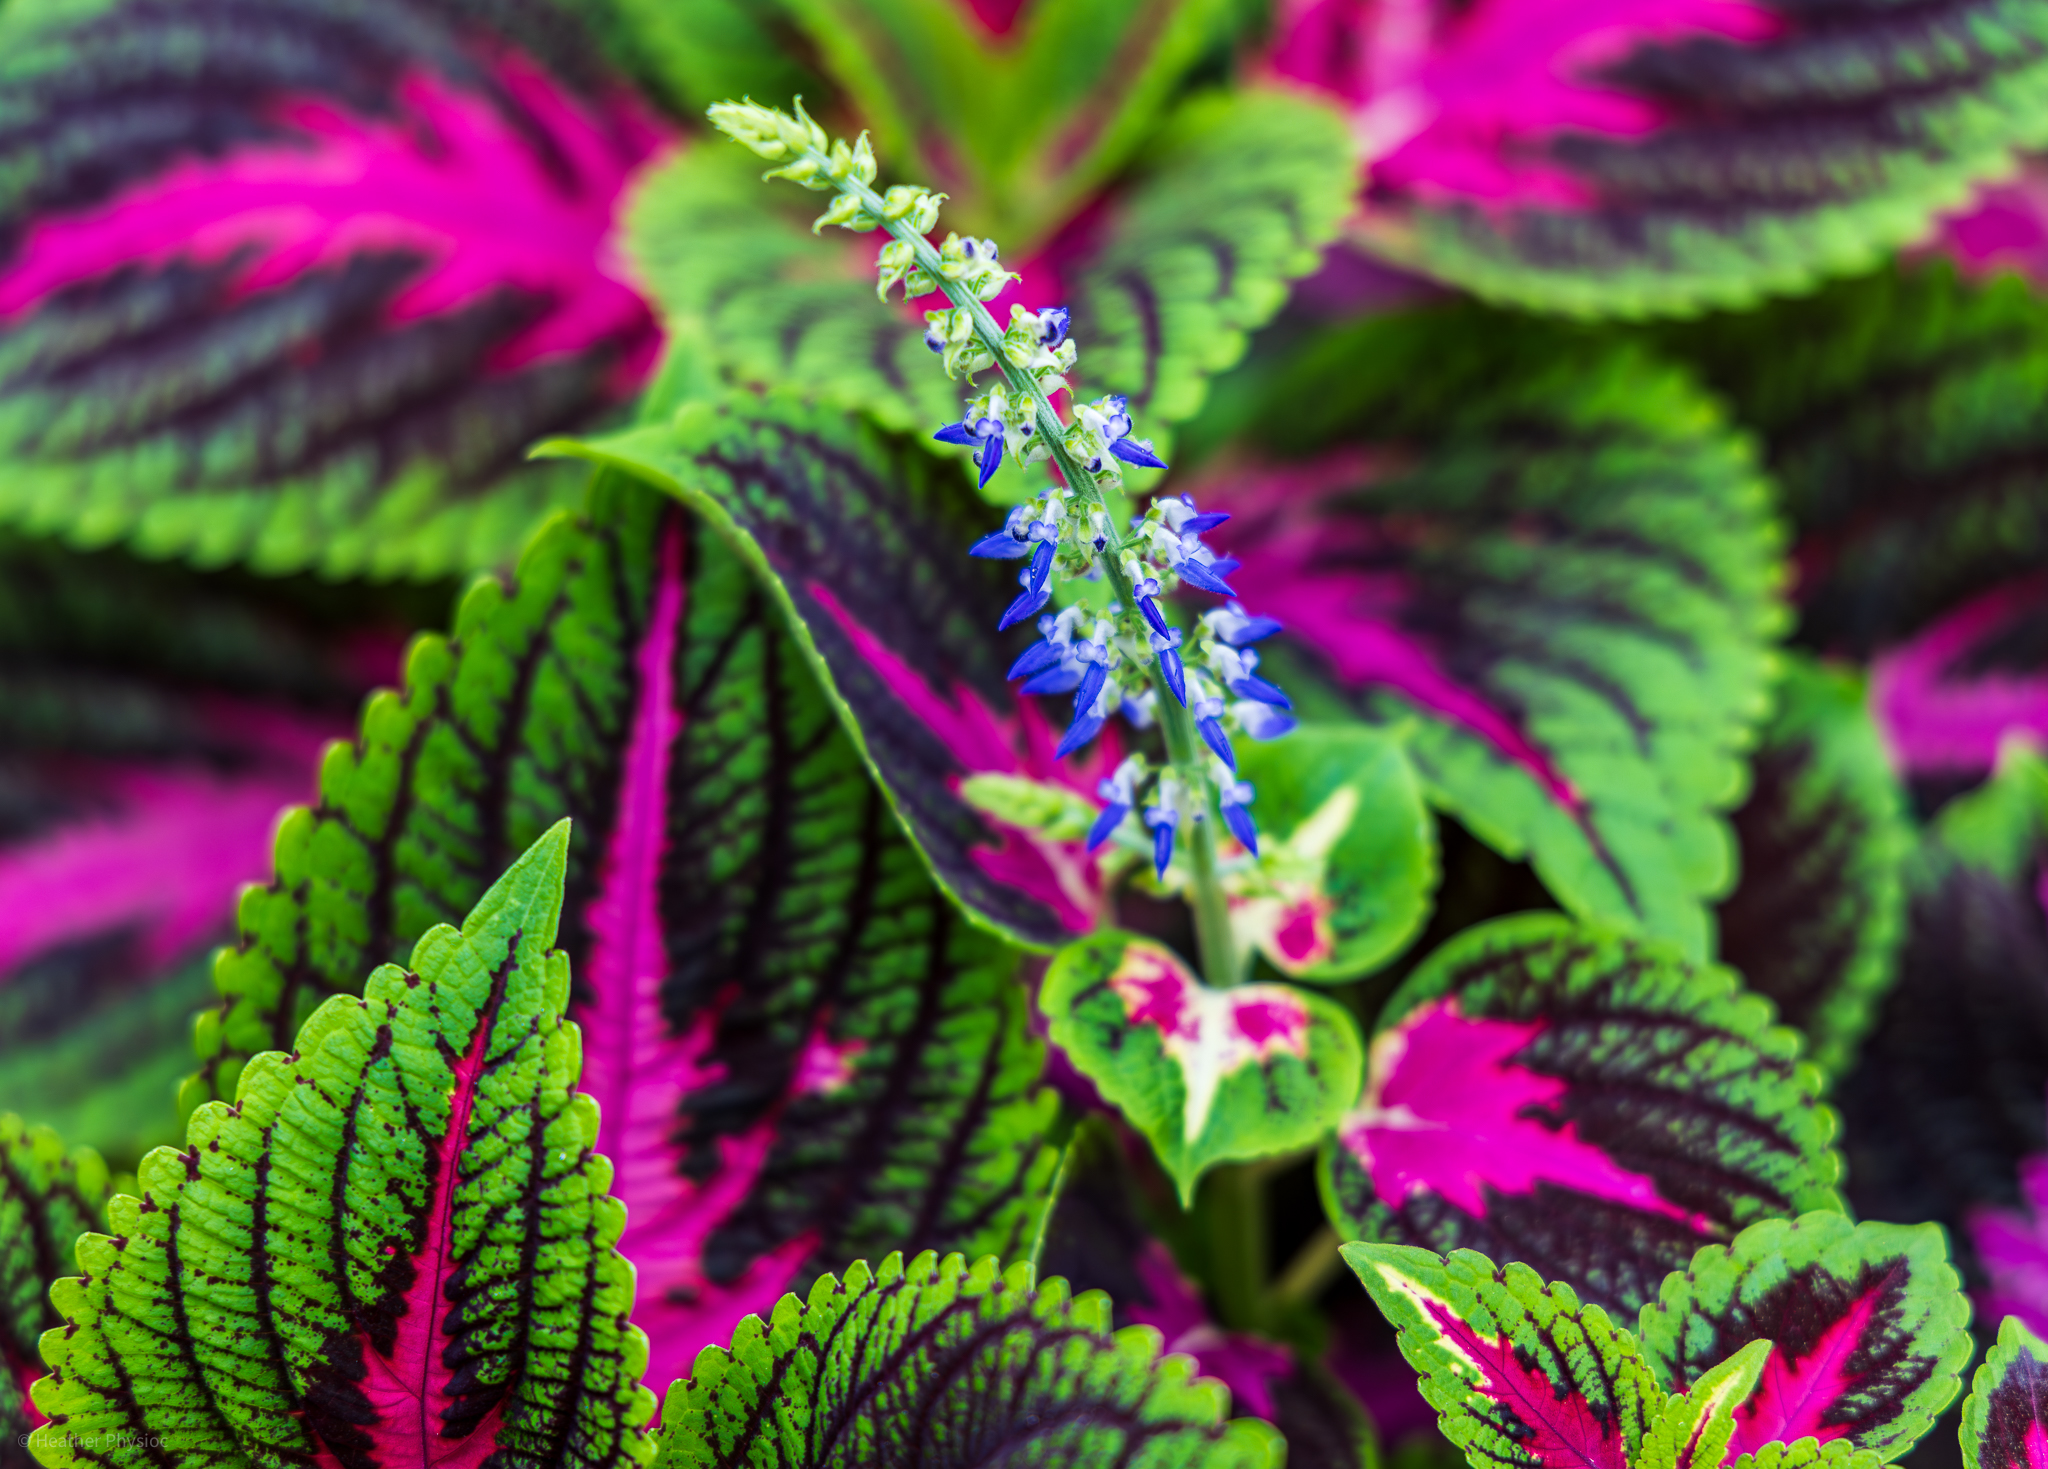 A lush Coleus plant showcasing vibrant green leaves with striking magenta veins, with a delicate spike of blue flowers rising above in a garden in Yucatan, Mexico.